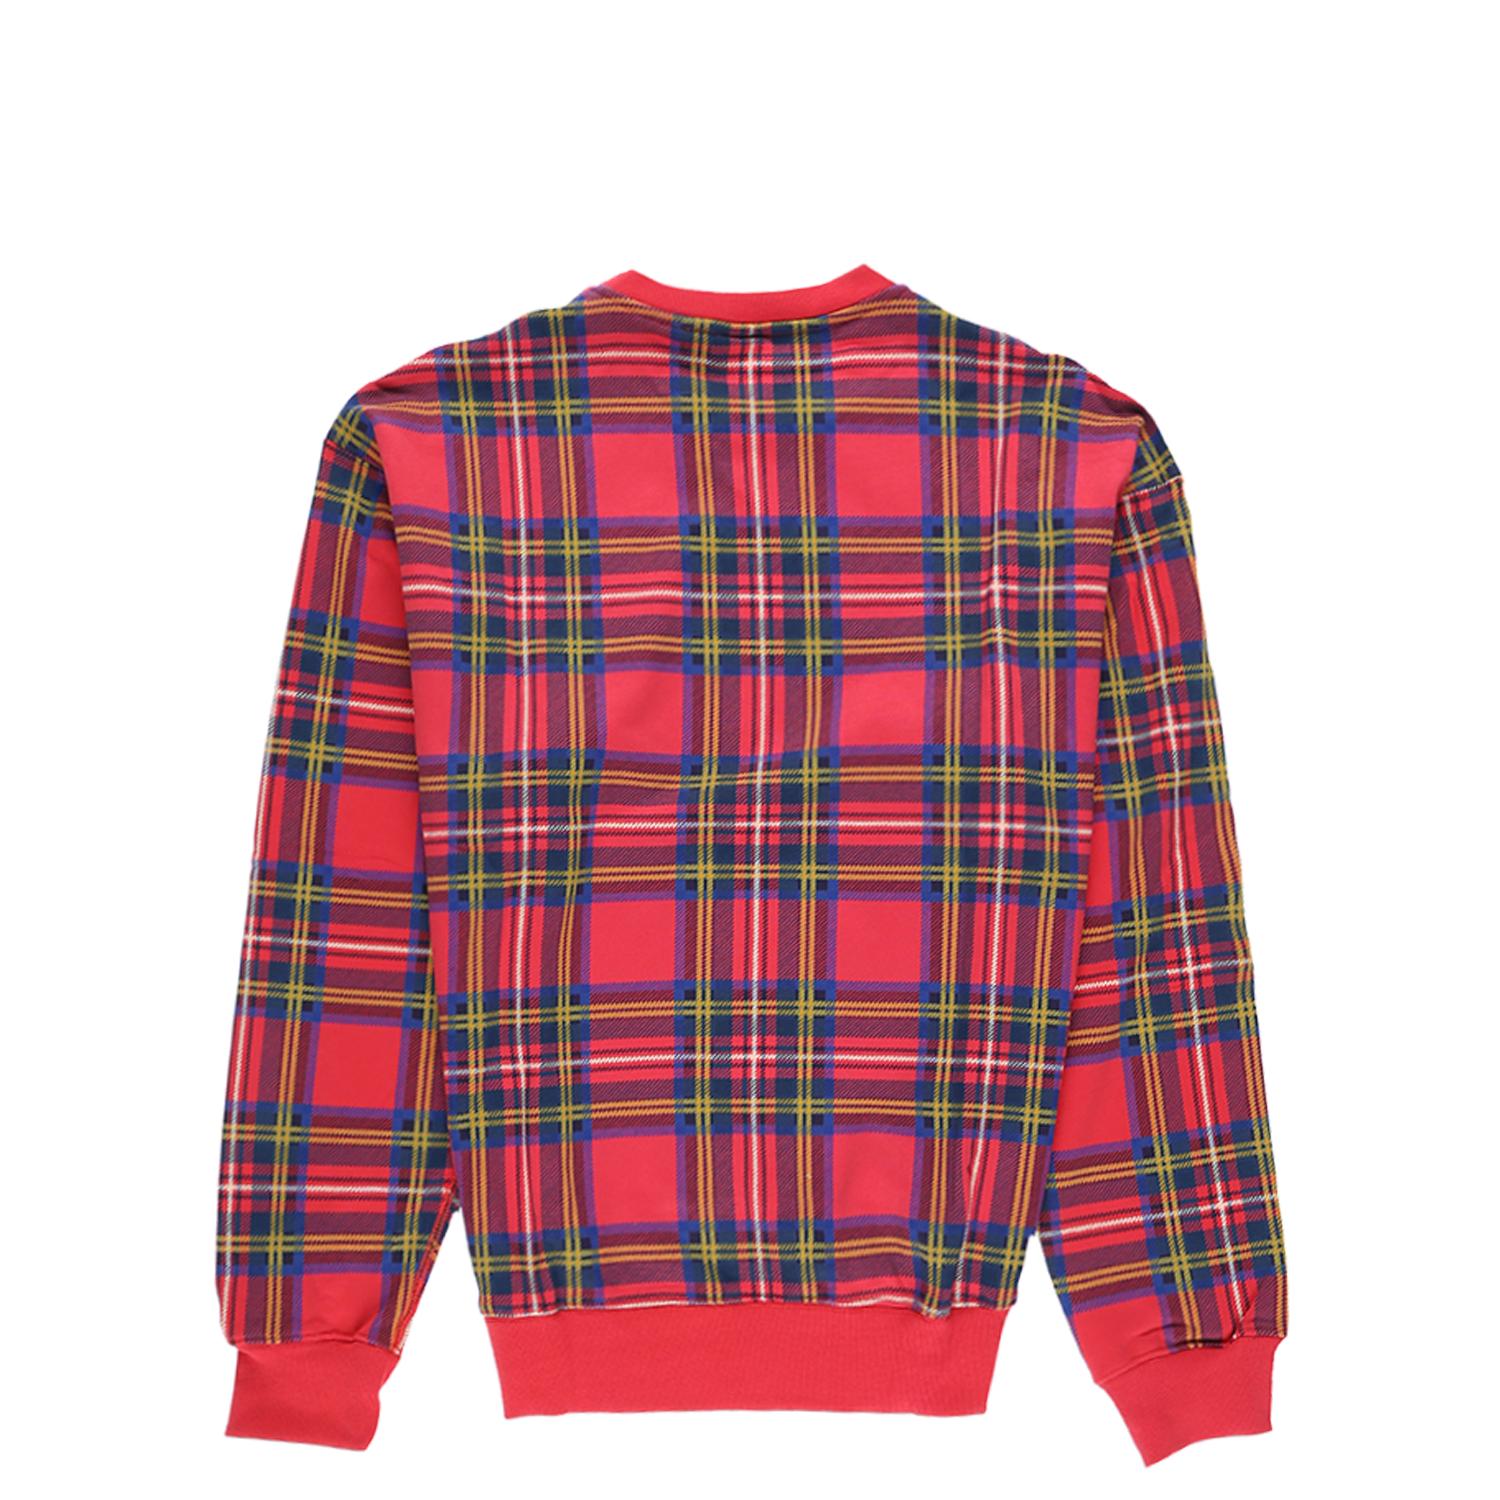 Nike Cotton Plaid Swoosh Striped Crewneck in University Red (Red) for ...